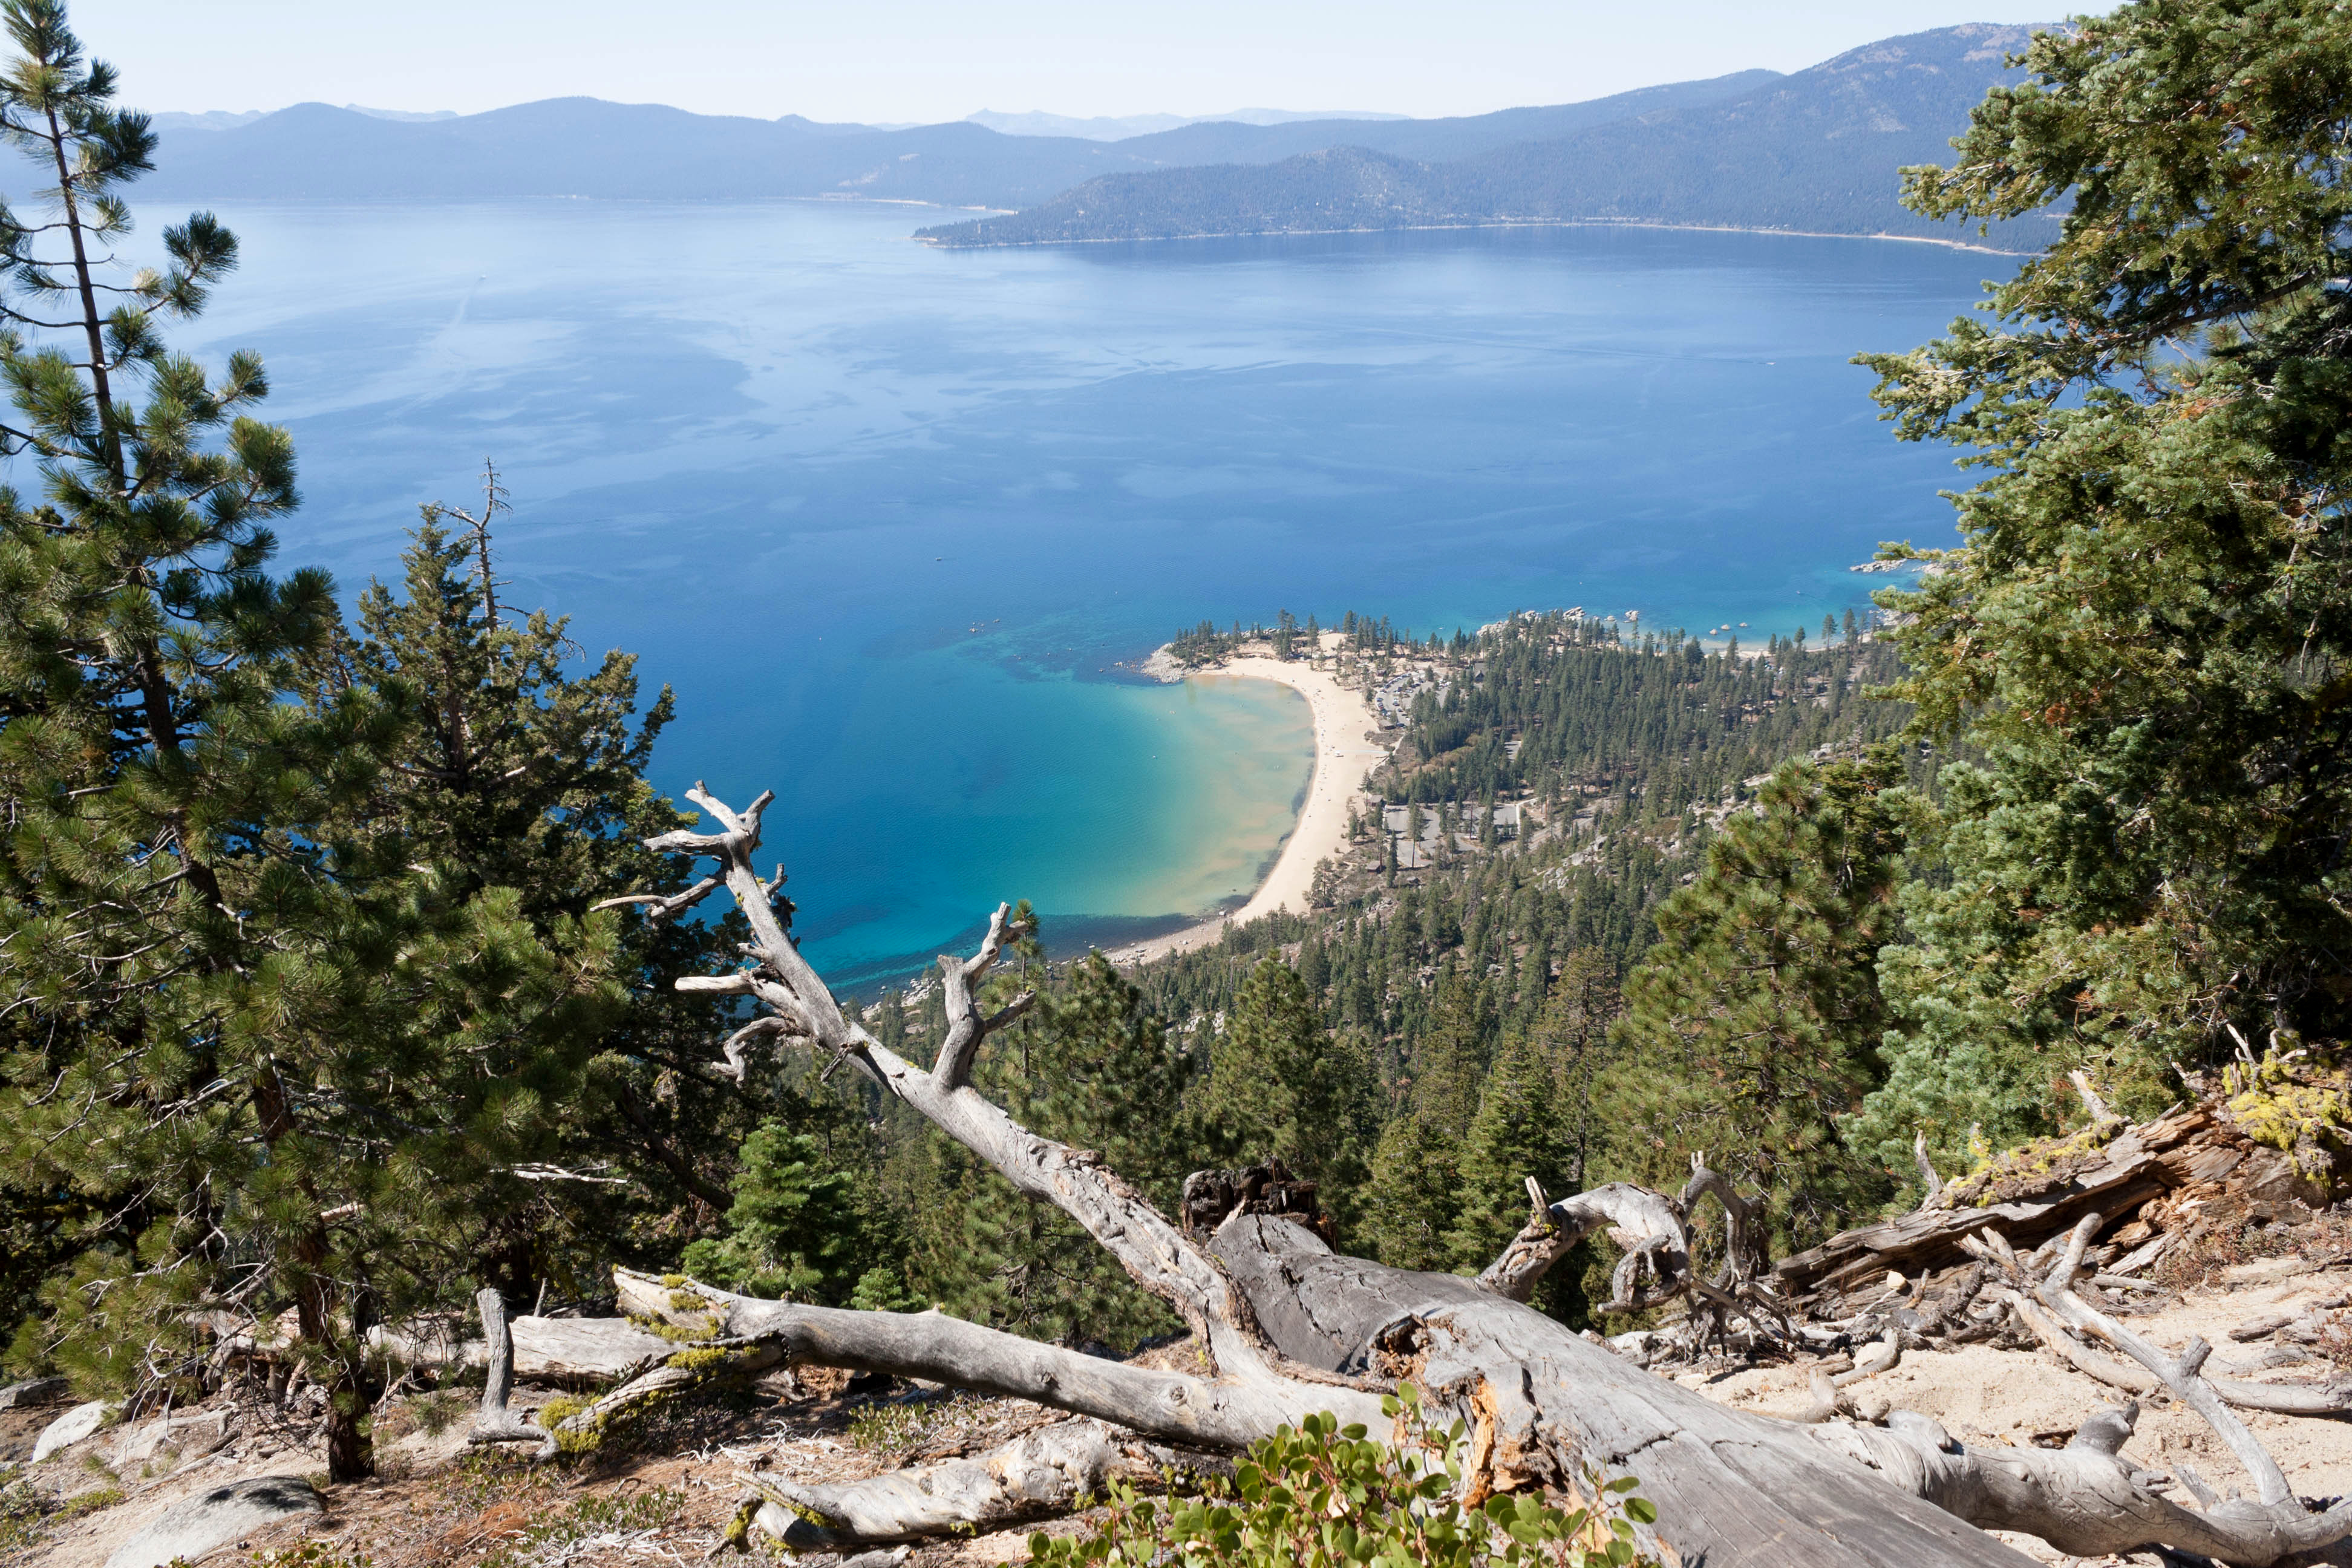 It's worth all the uphills along the Flume Trail for the sweeping views across Lake Tahoe. Image by Alexander Howard / Lonely Planet